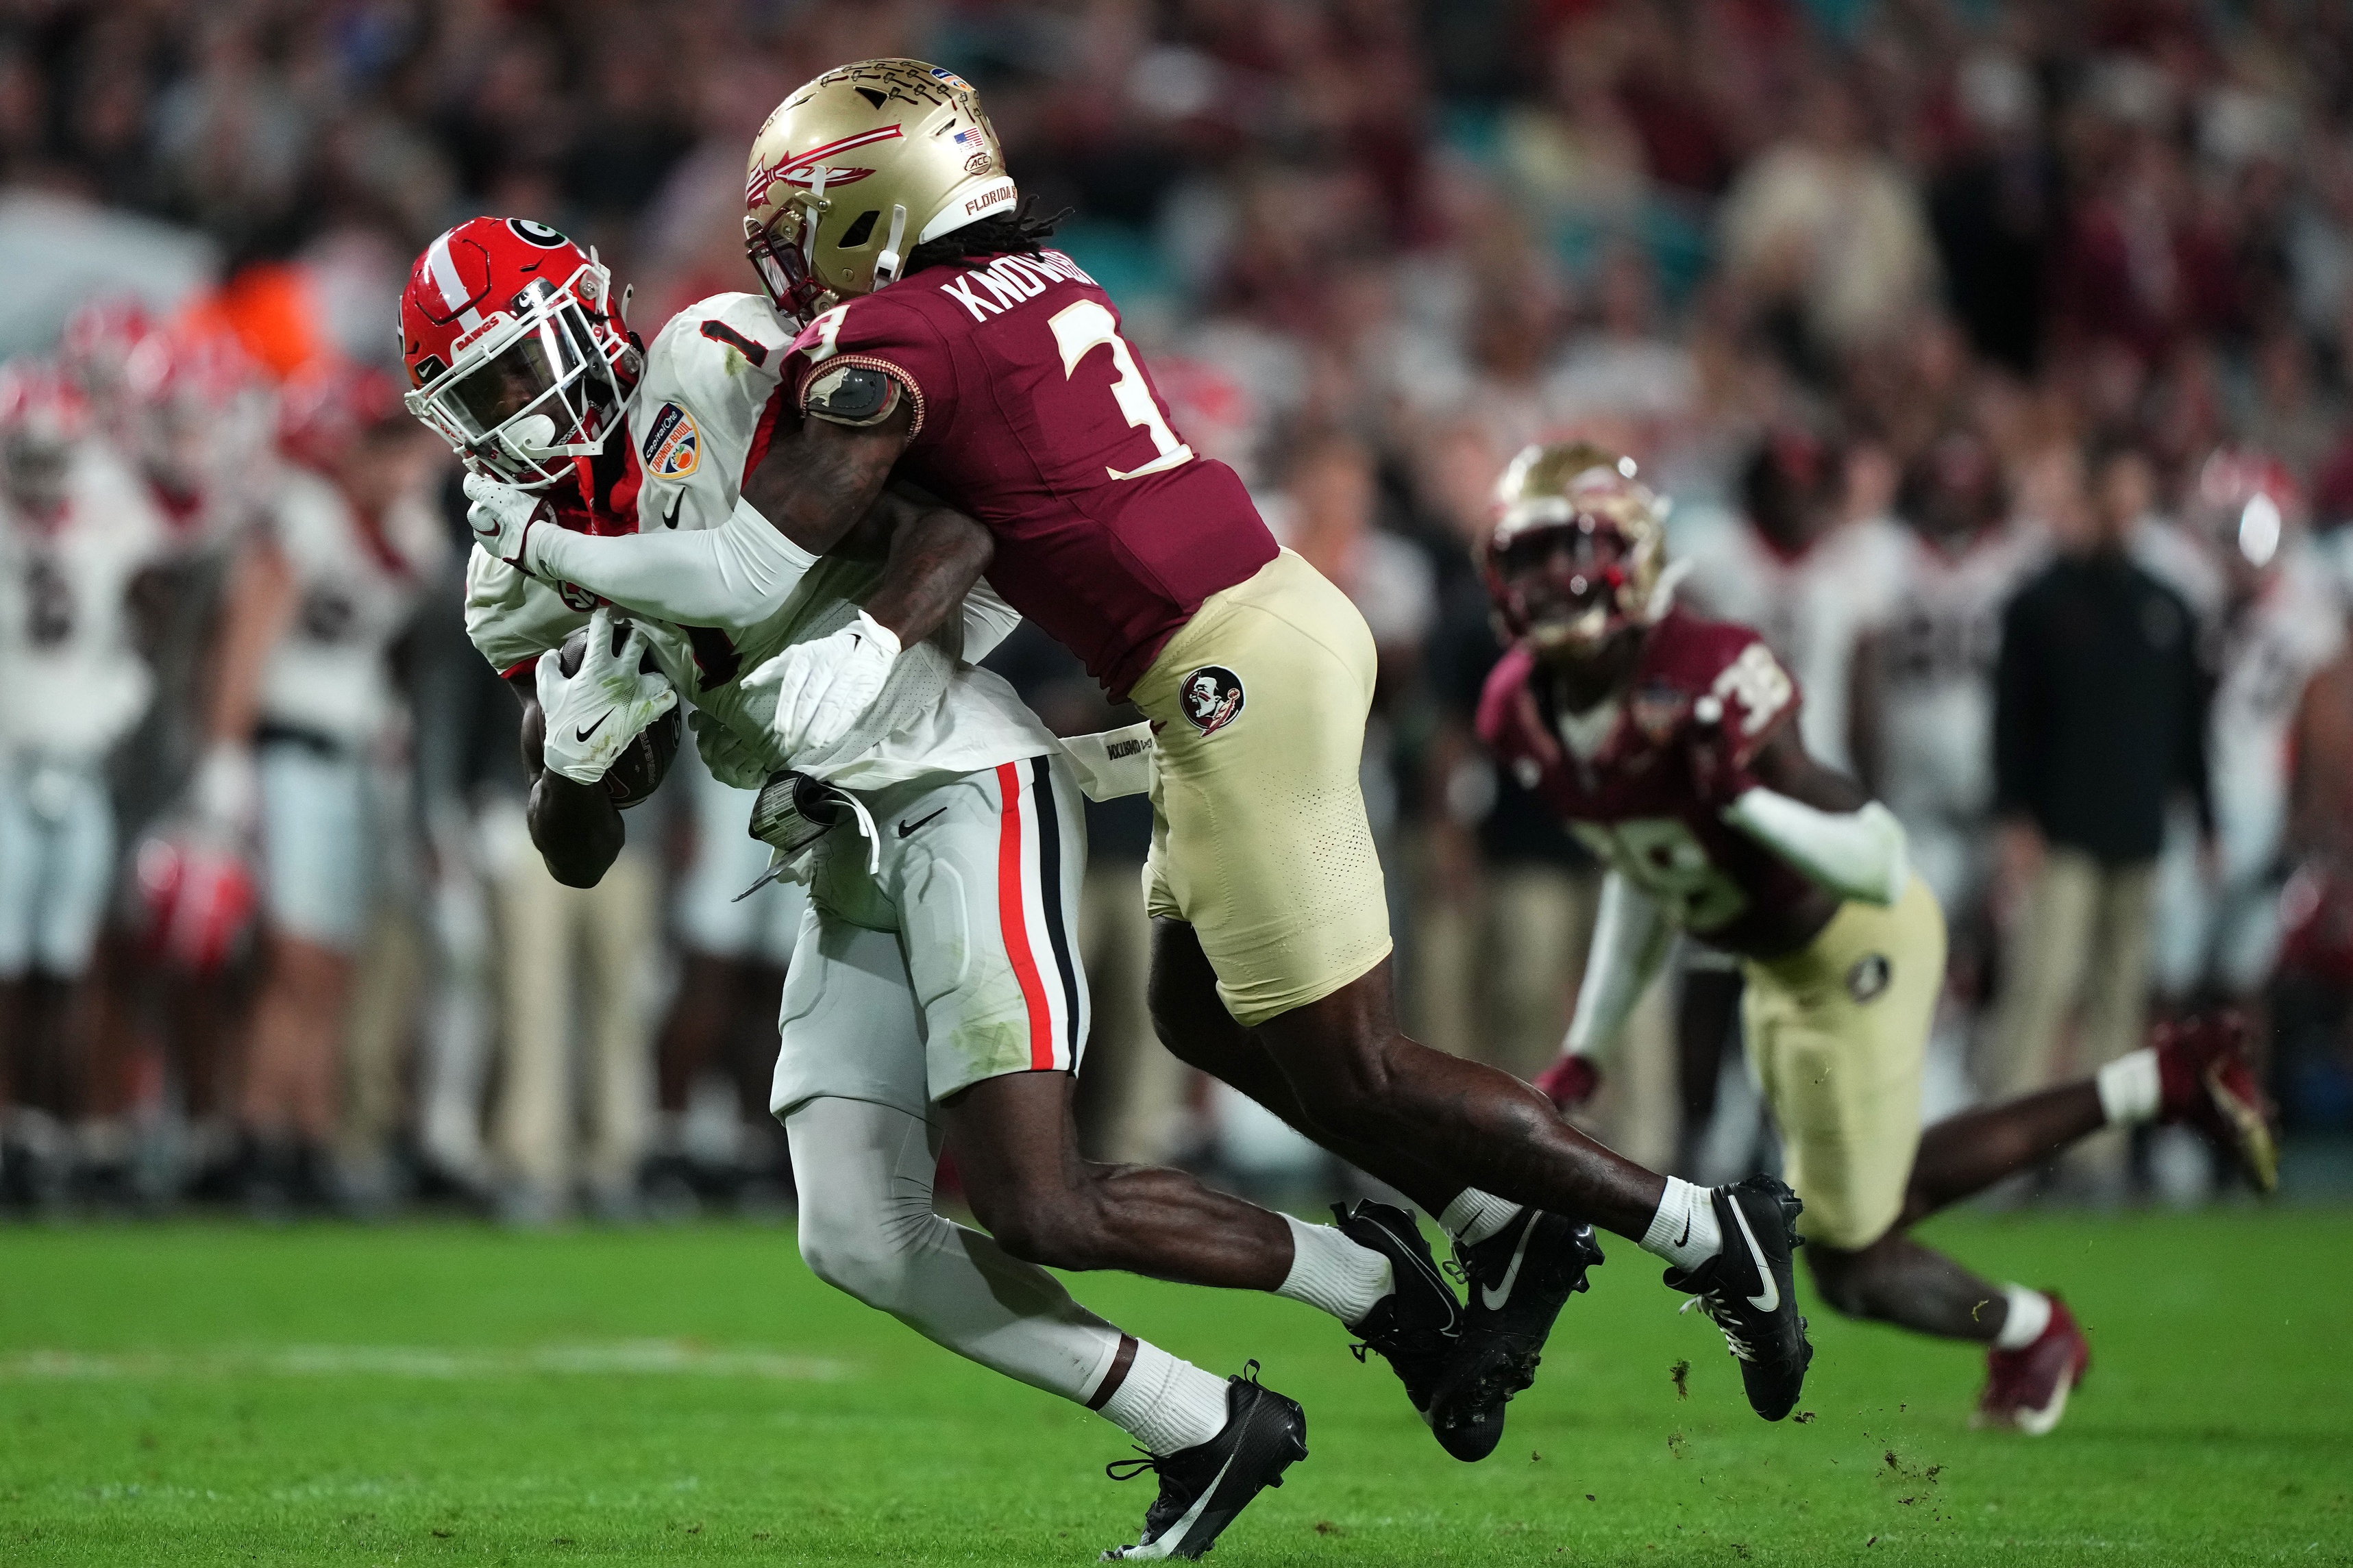 Dec 30, 2023; Miami Gardens, FL, USA; Georgia Bulldogs wide receiver Marcus Rosemy-Jacksaint (1) makes a catch against Florida State Seminoles defensive back Kevin Knowles II (3) during the second half in the 2023 Orange Bowl at Hard Rock Stadium. Mandatory Credit: Jasen Vinlove-USA TODAY Sports  